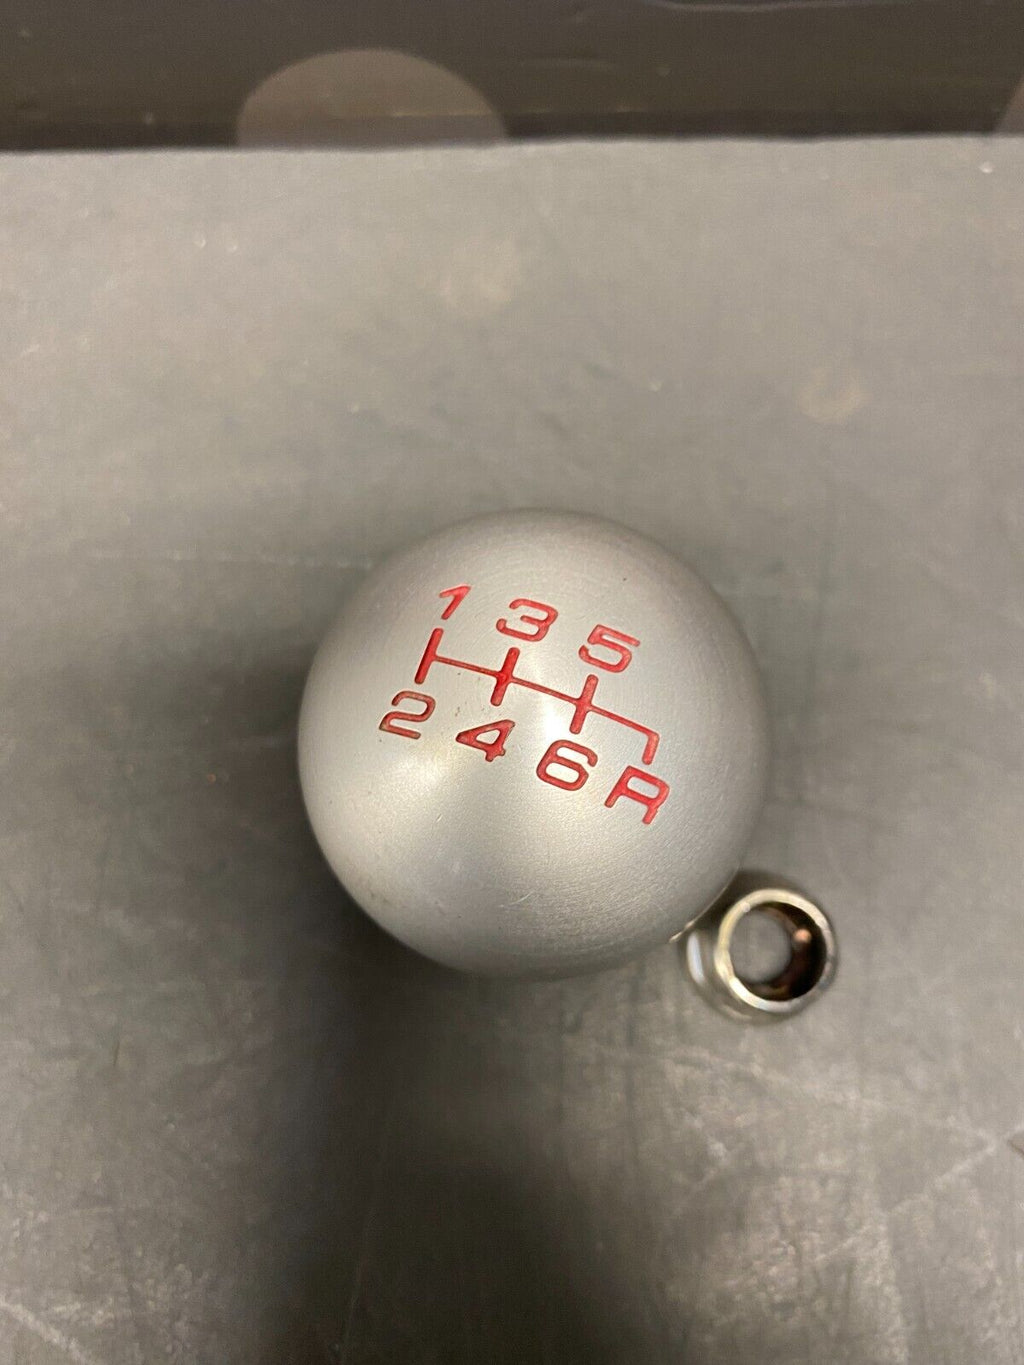 2007 HONDA S2000 AP2 AFTERMARKET SHIFT KNOB WITH RED LETTERING USED